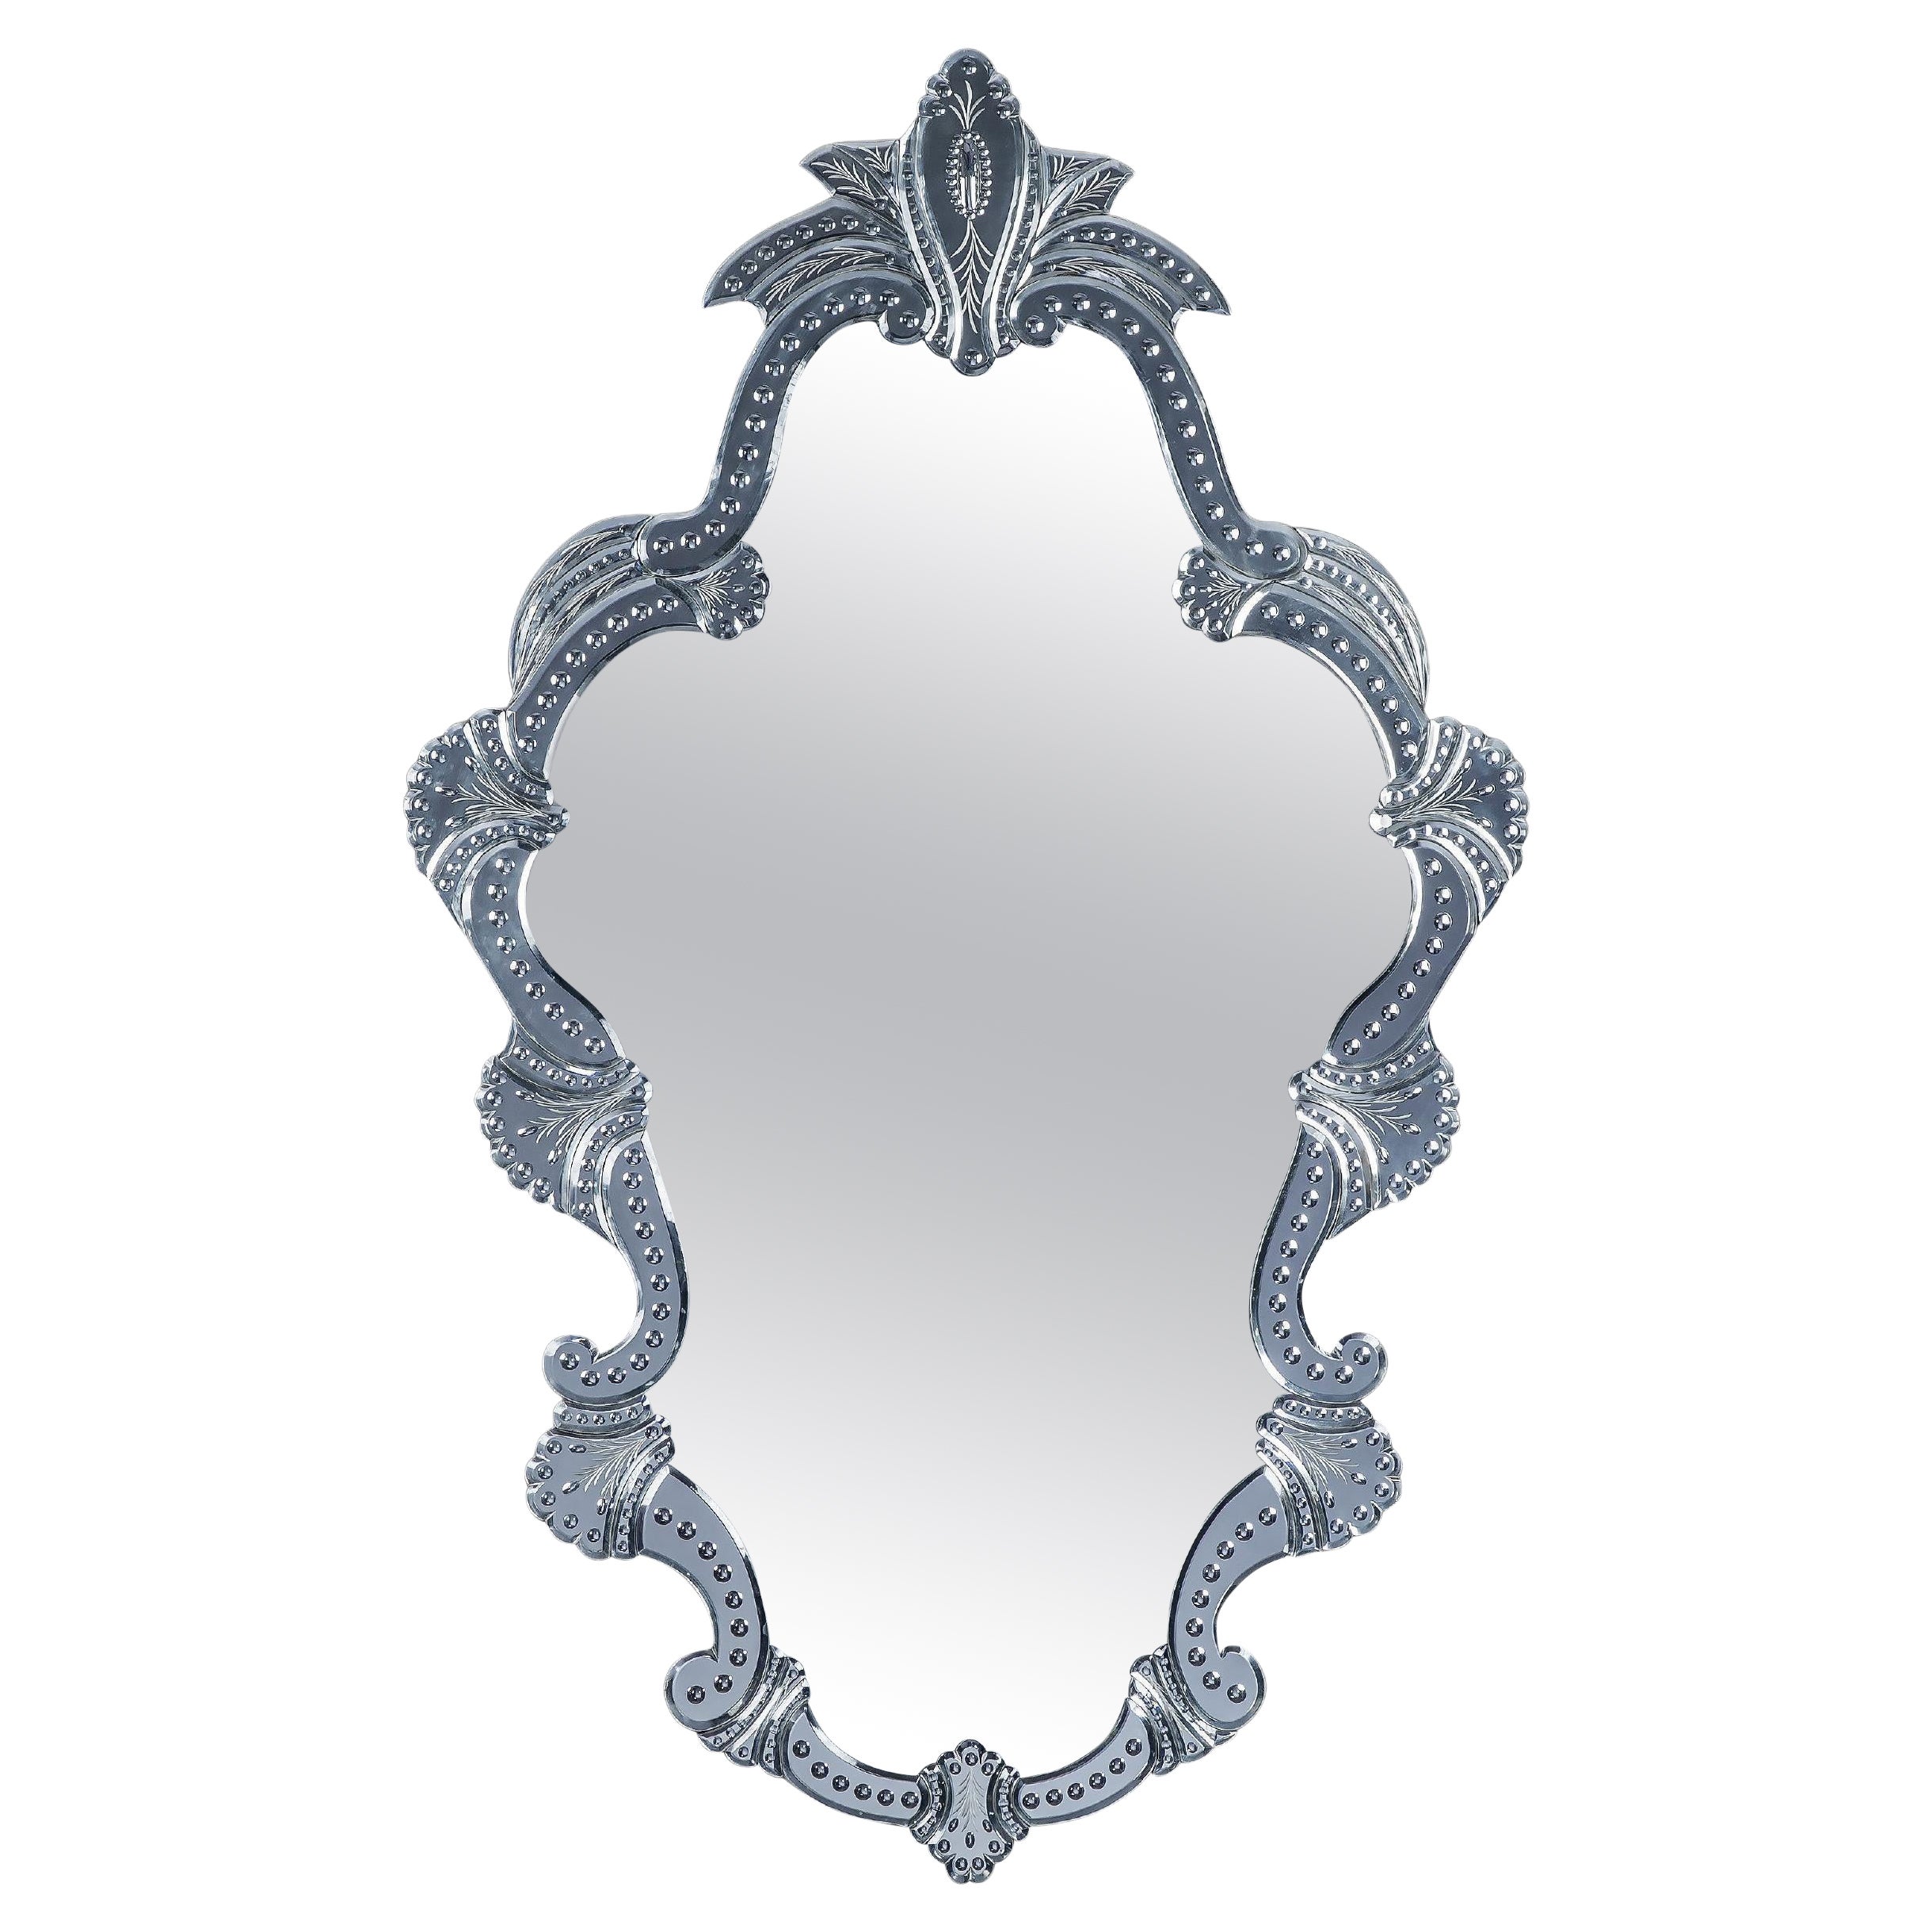 "Alì Baba" Murano Glass Mirror, 800 French Style by Fratelli Tosi For Sale